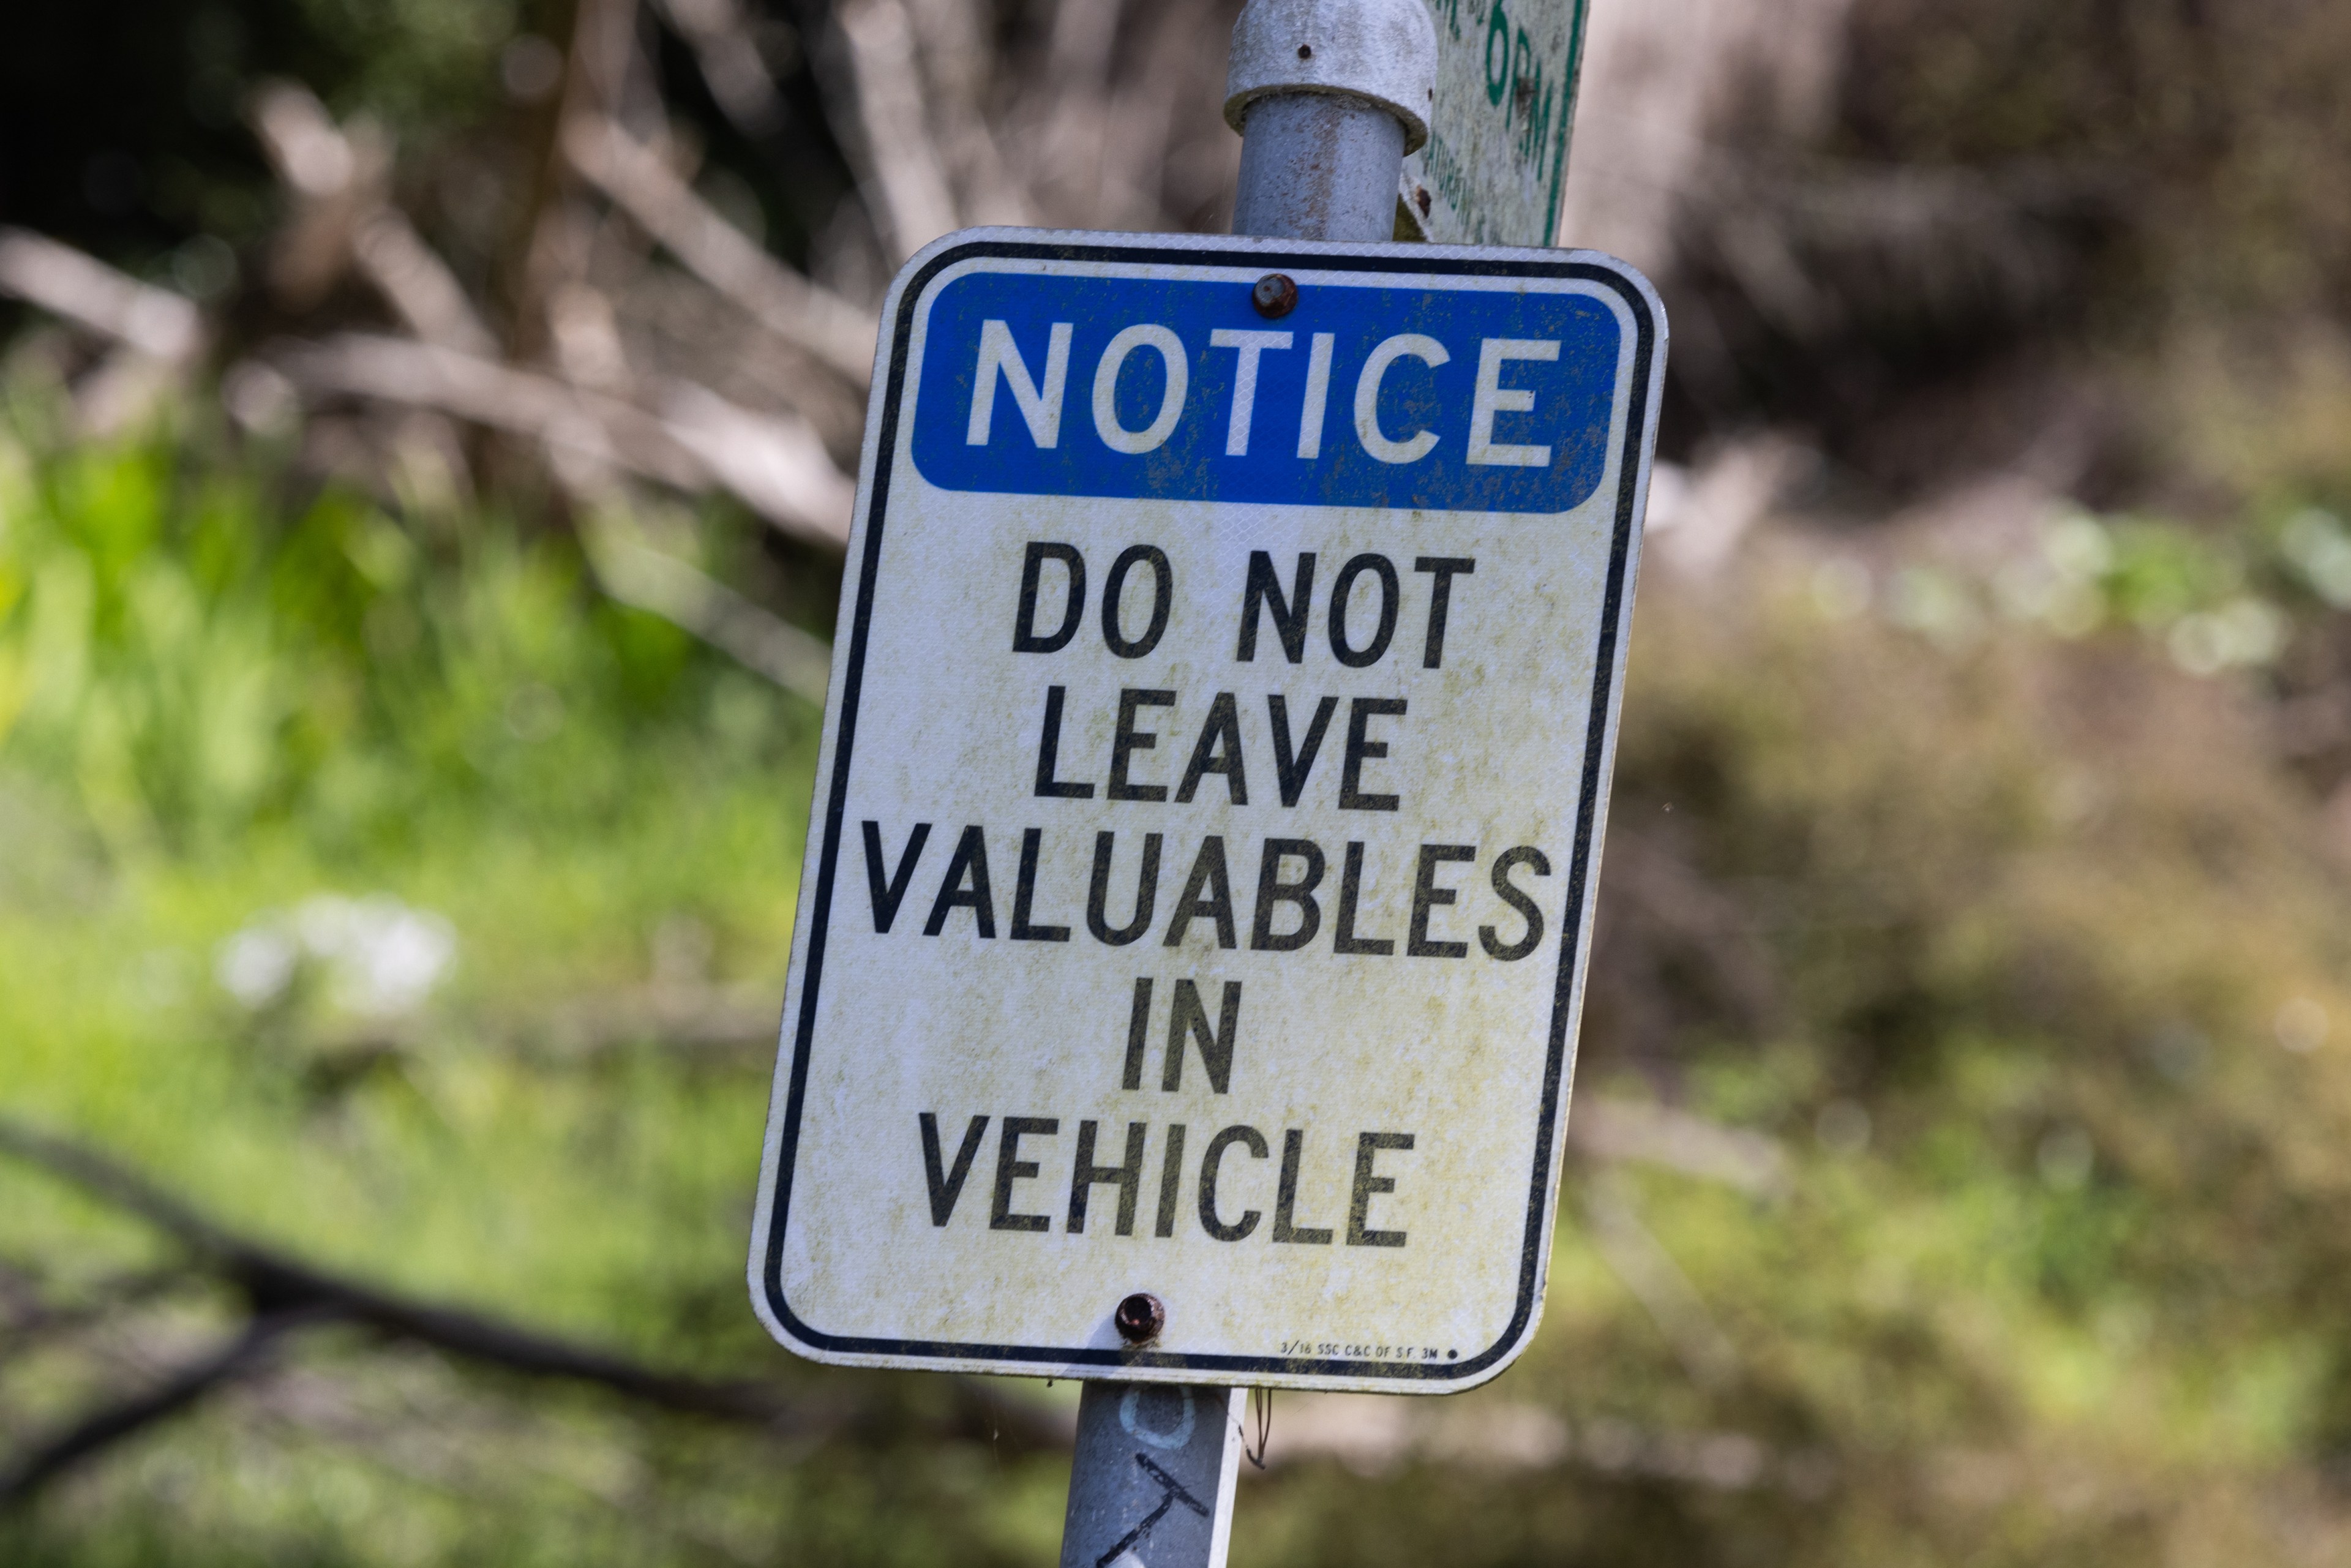 A weathered warning sign attached to a pole reads, &quot;NOTICE DO NOT LEAVE VALUABLES IN VEHICLE,&quot; set against a blurred natural background.